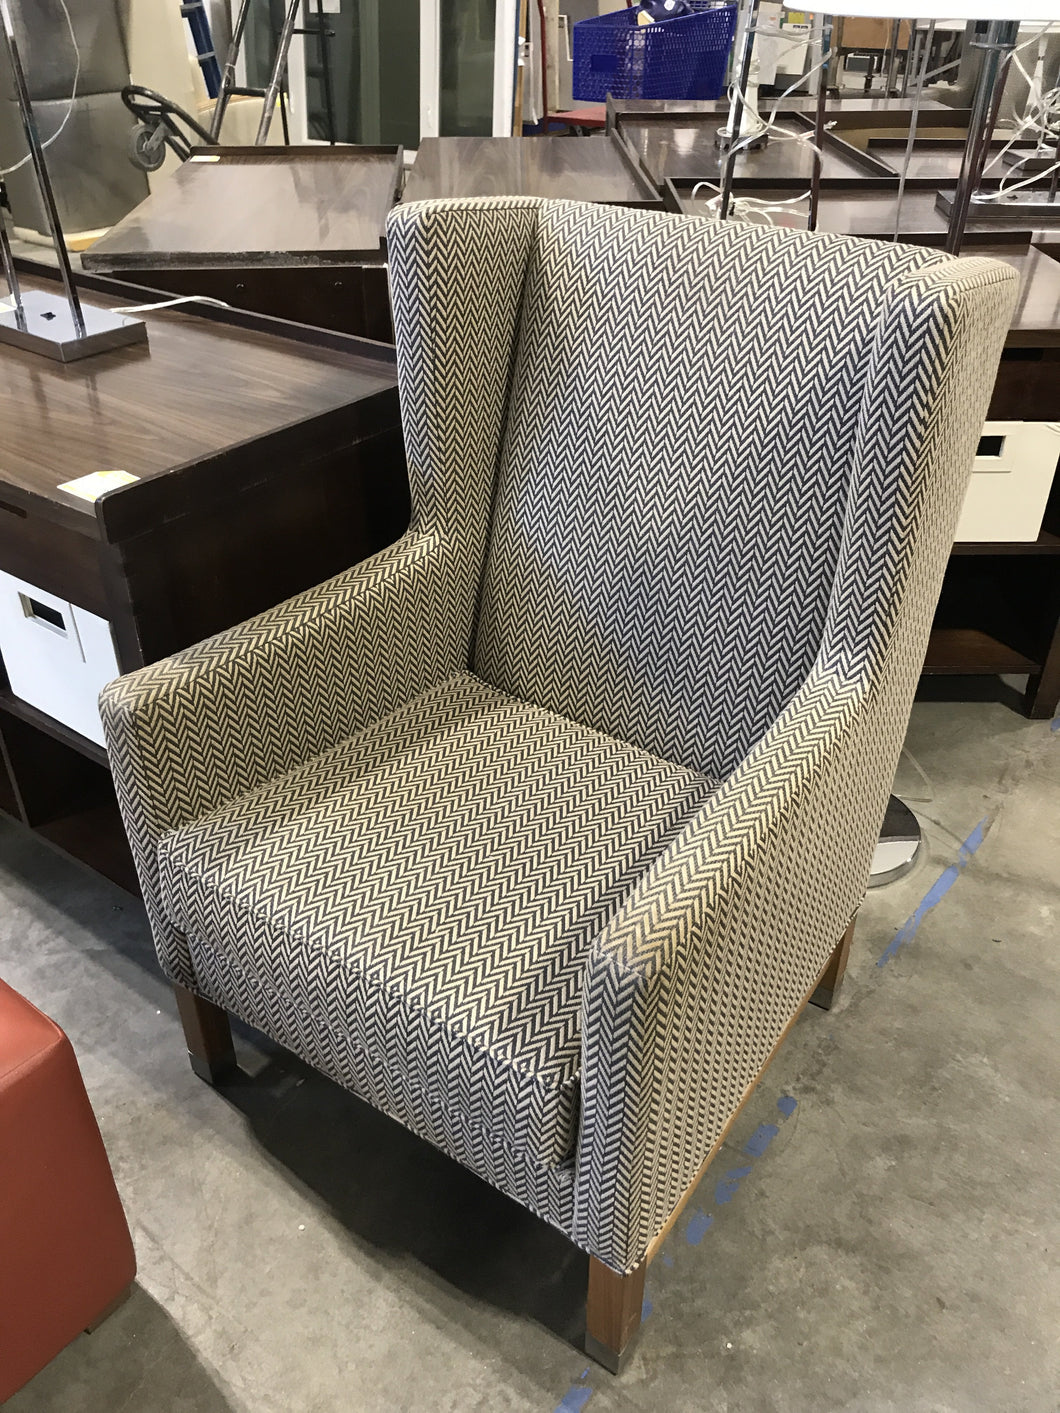 Toulouse Patterned Armchair - Kenner Habitat for Humanity ReStore